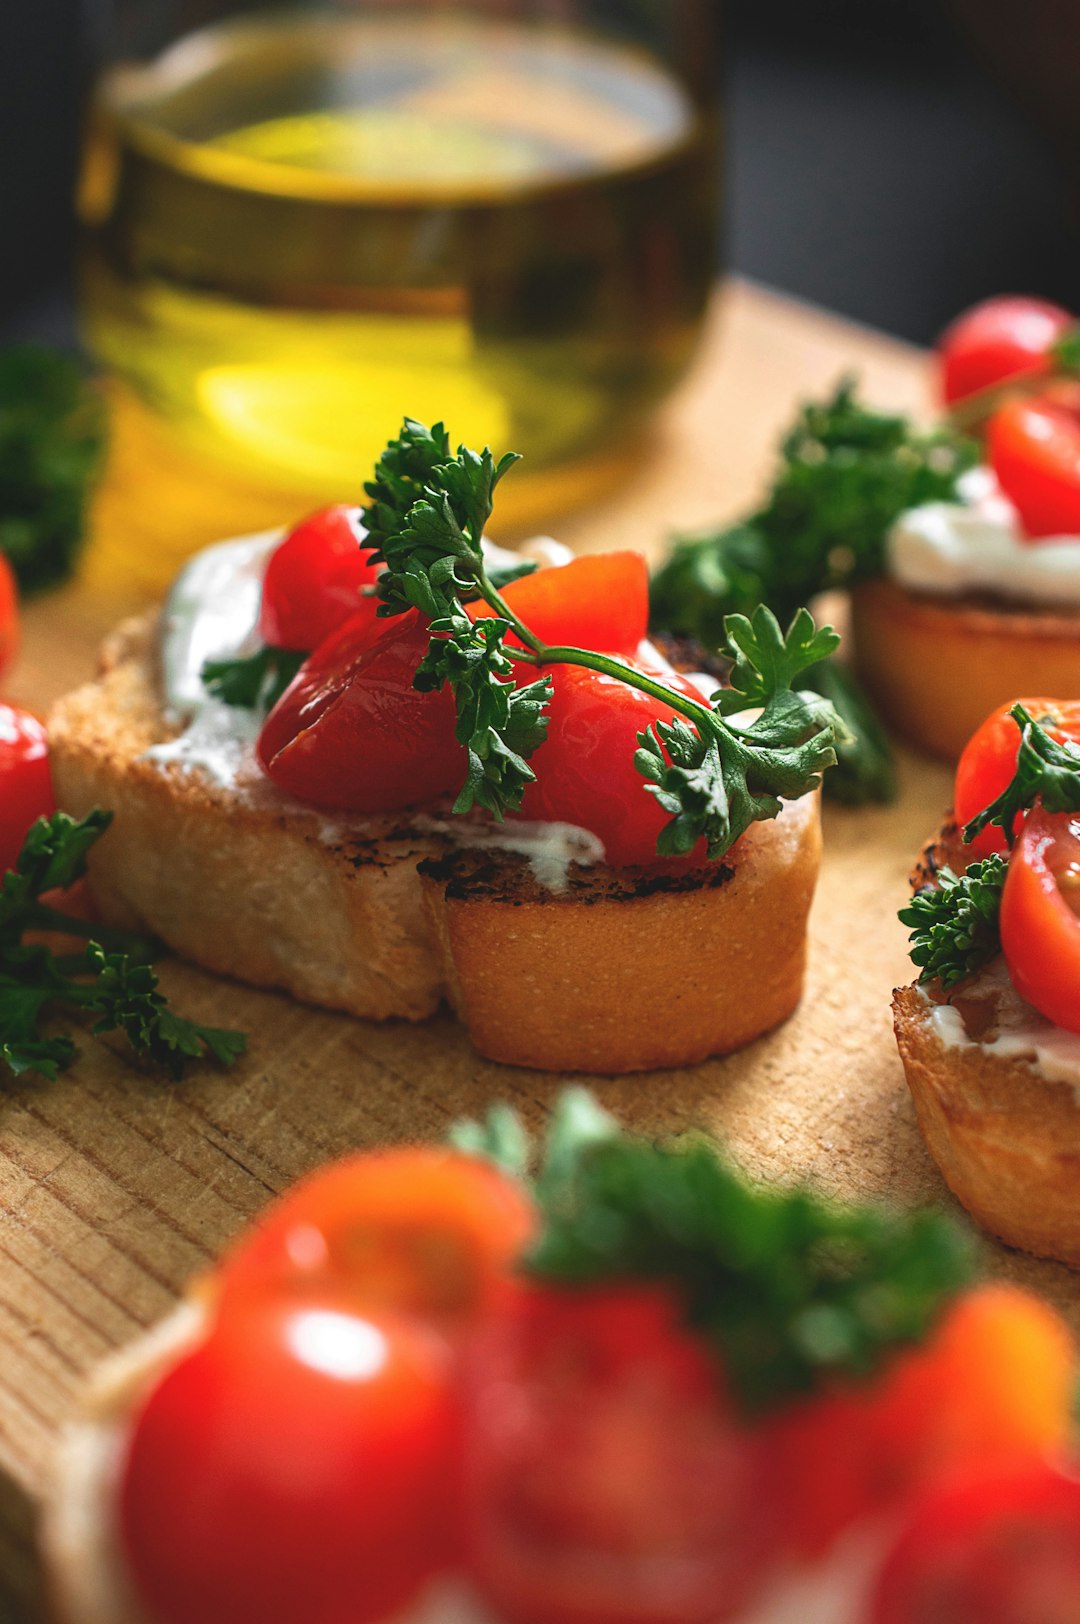 bread with tomato and green leaves